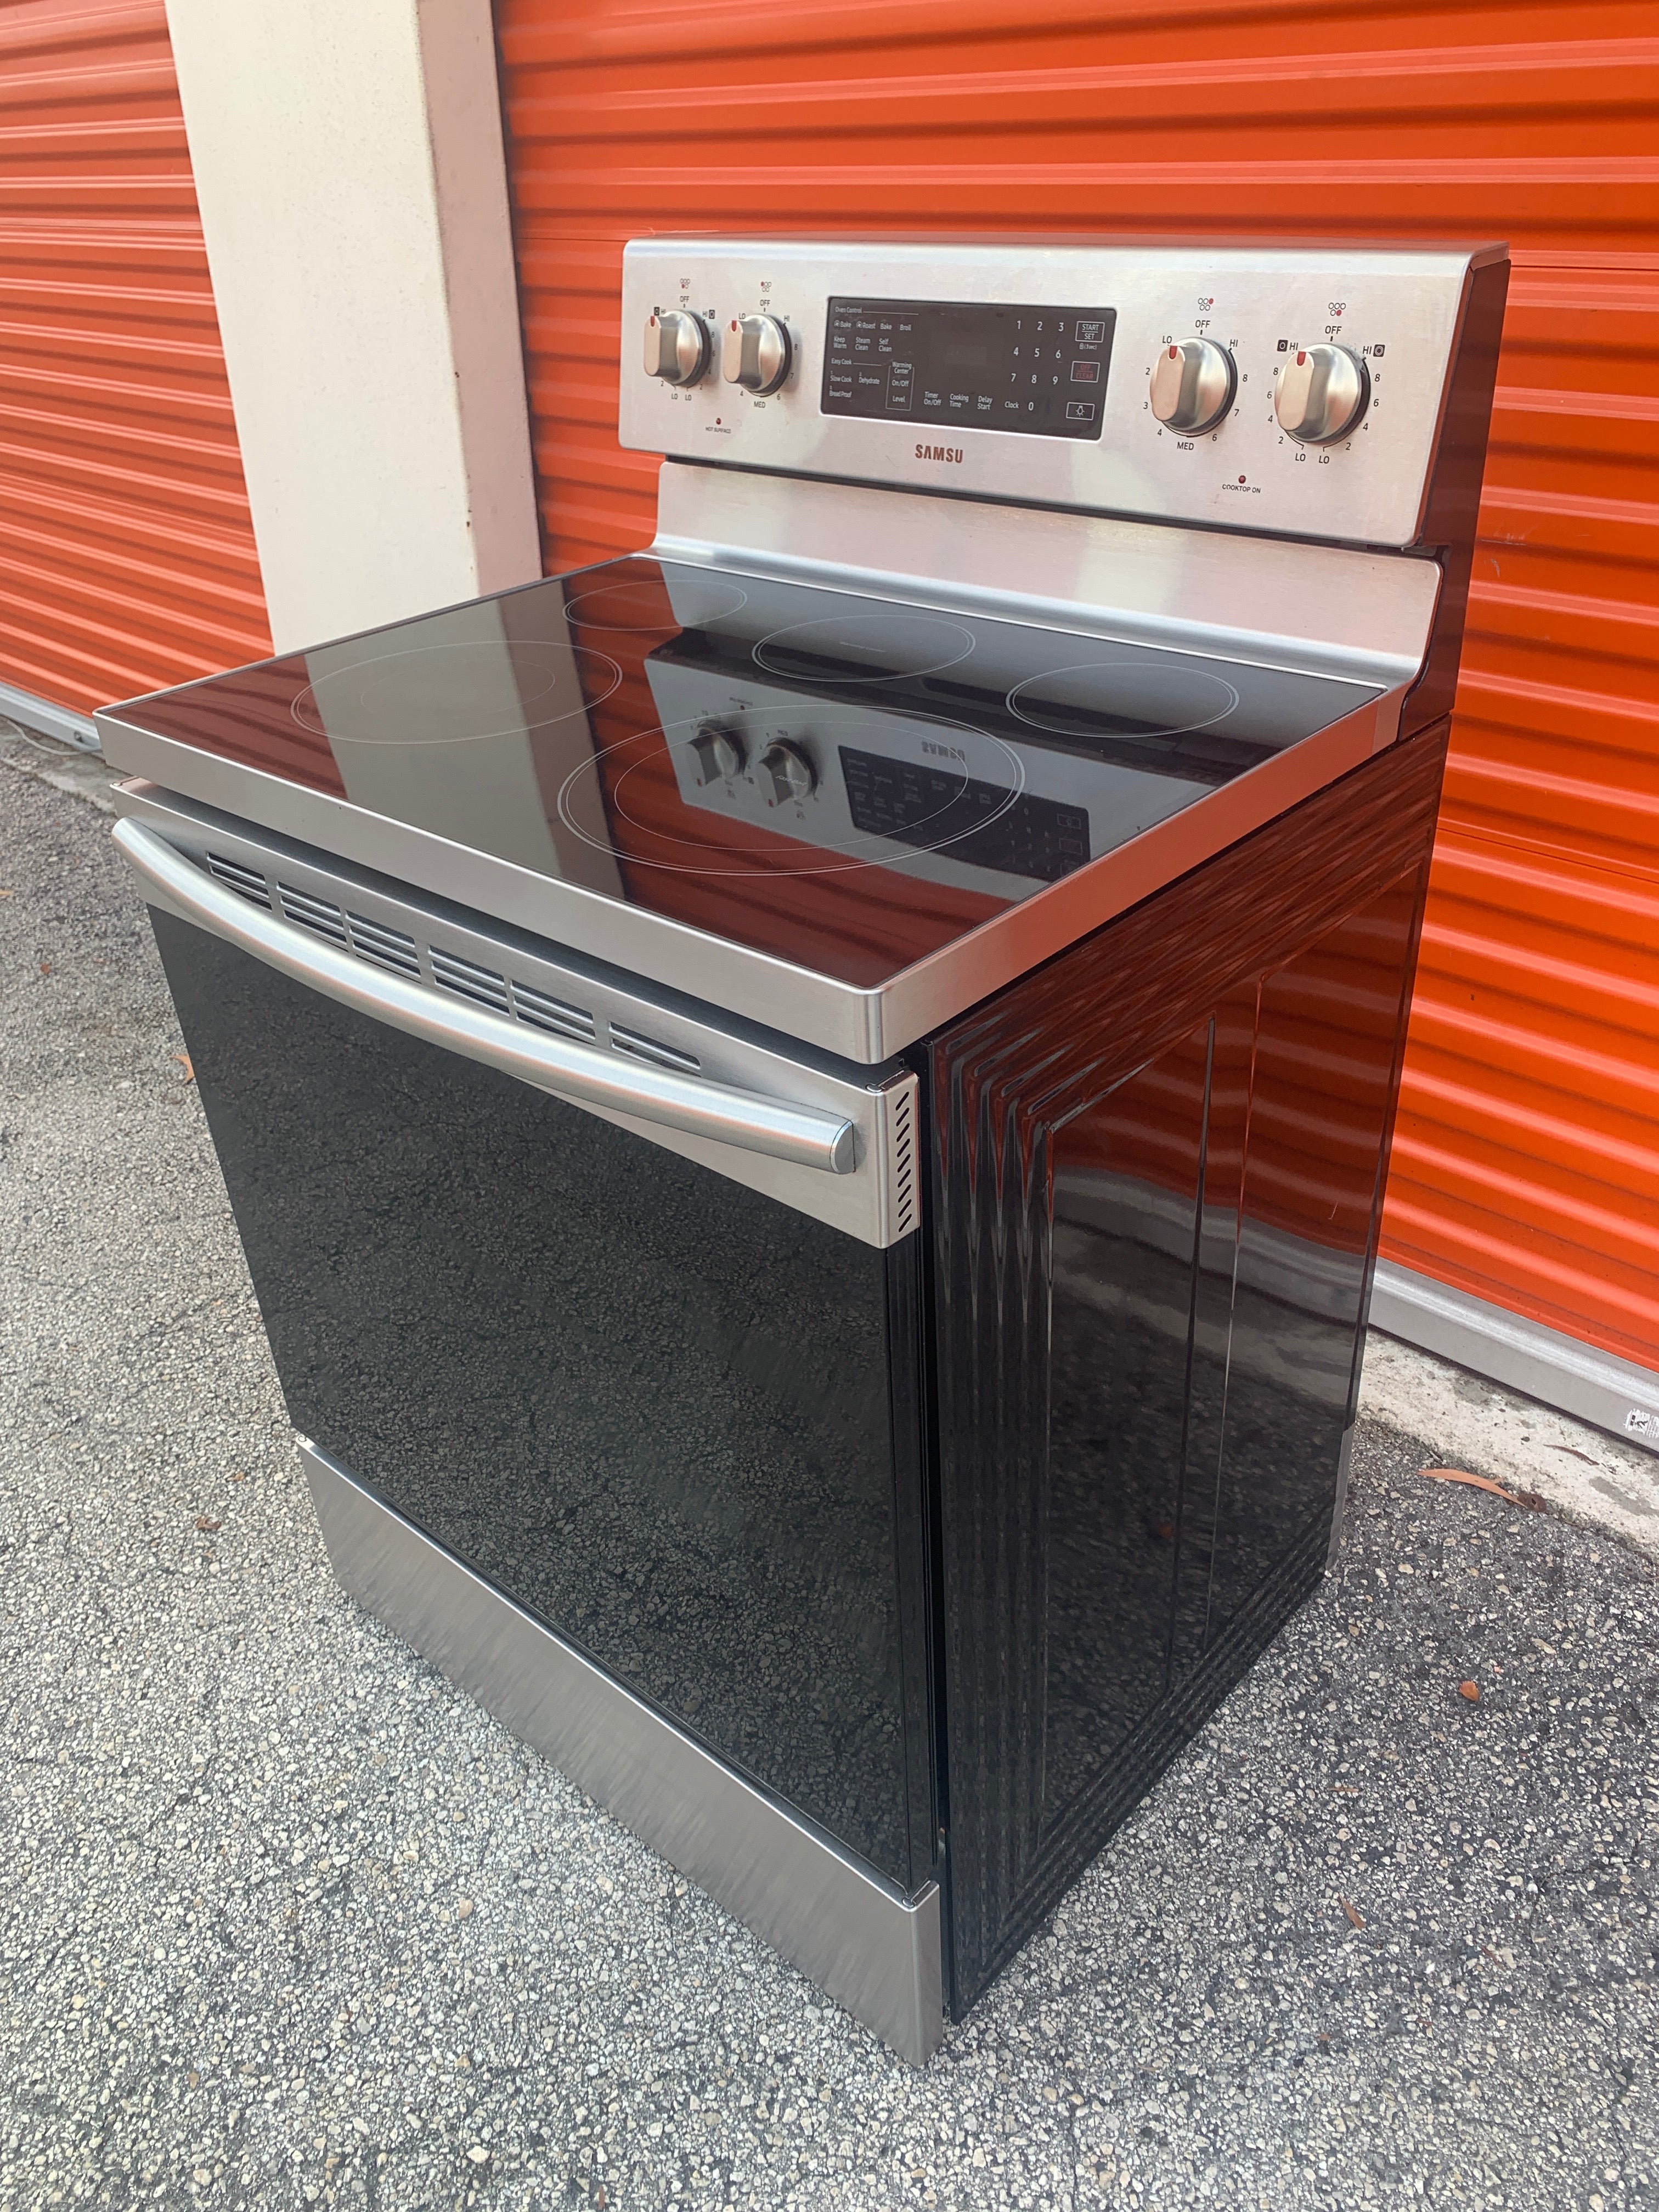 Samsung Stainless Steel Electric Stove